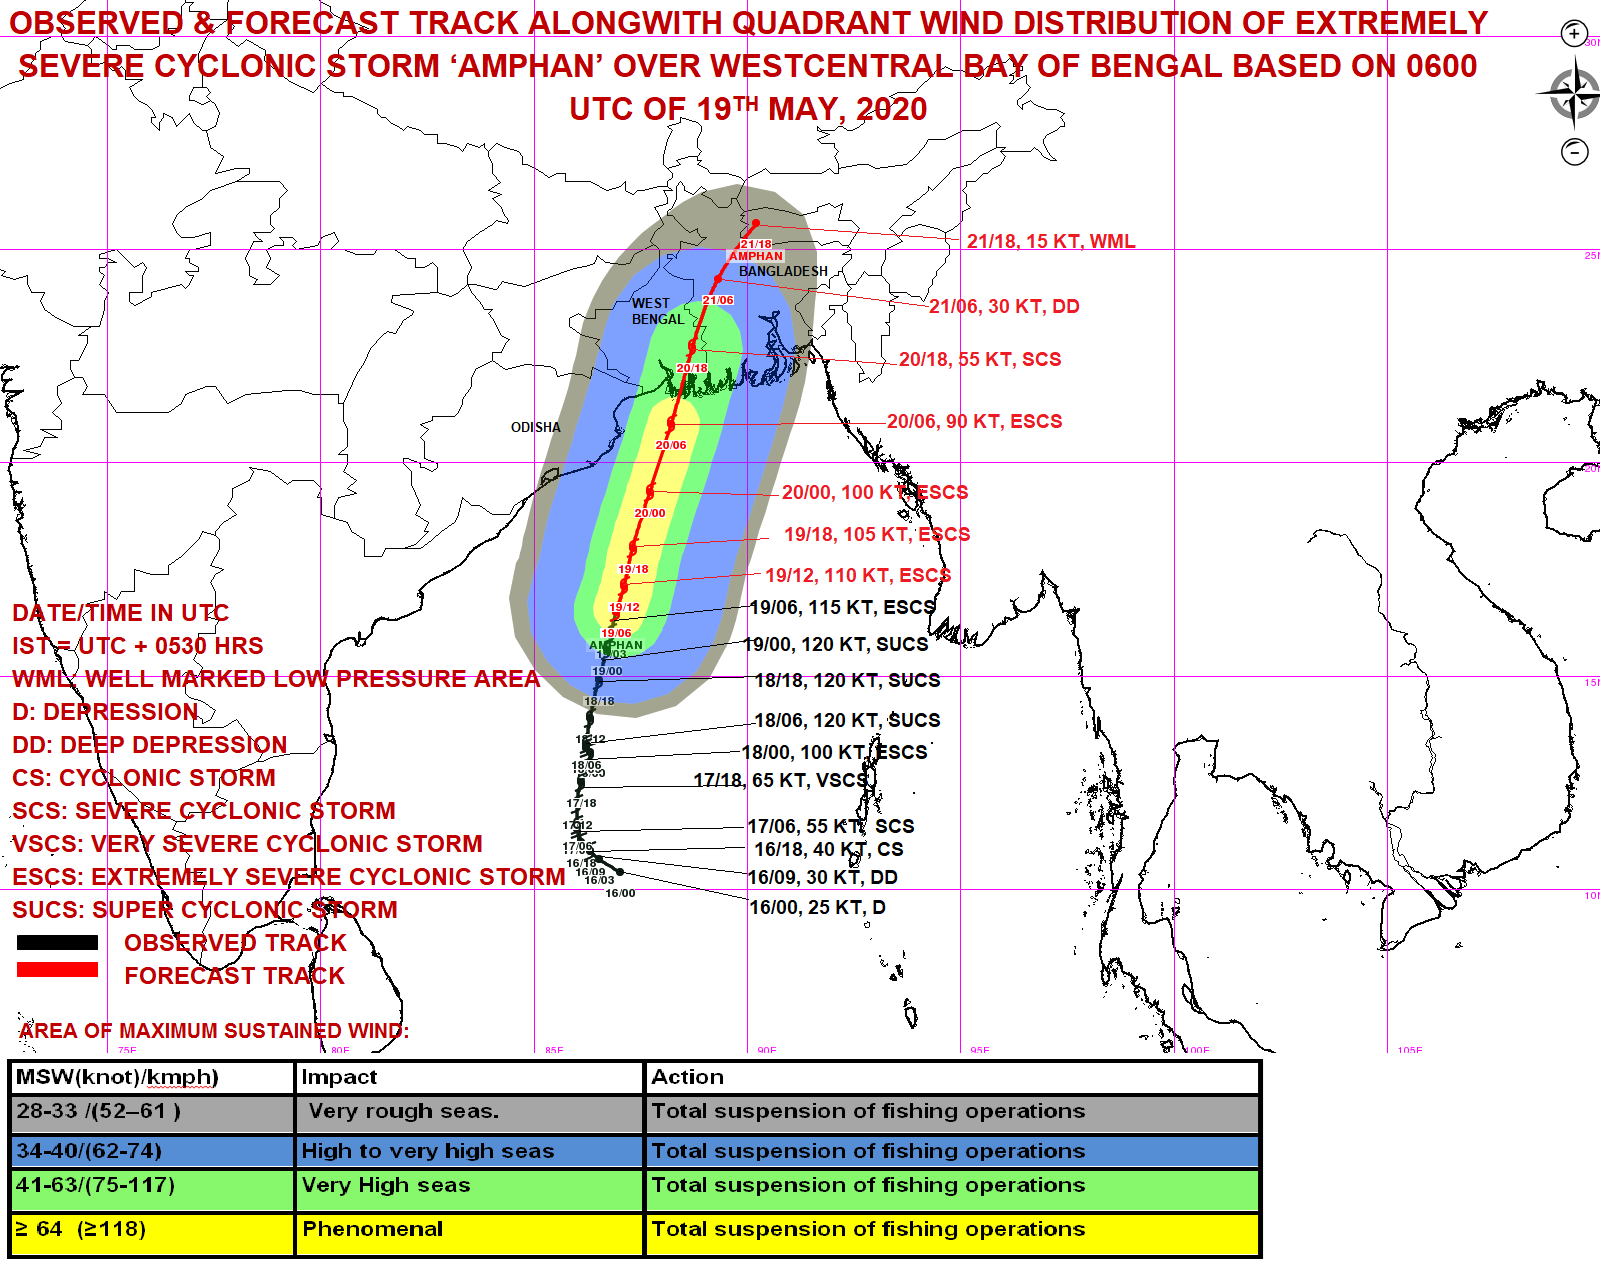 Year end 2021: Cyclonic storms hit India this year